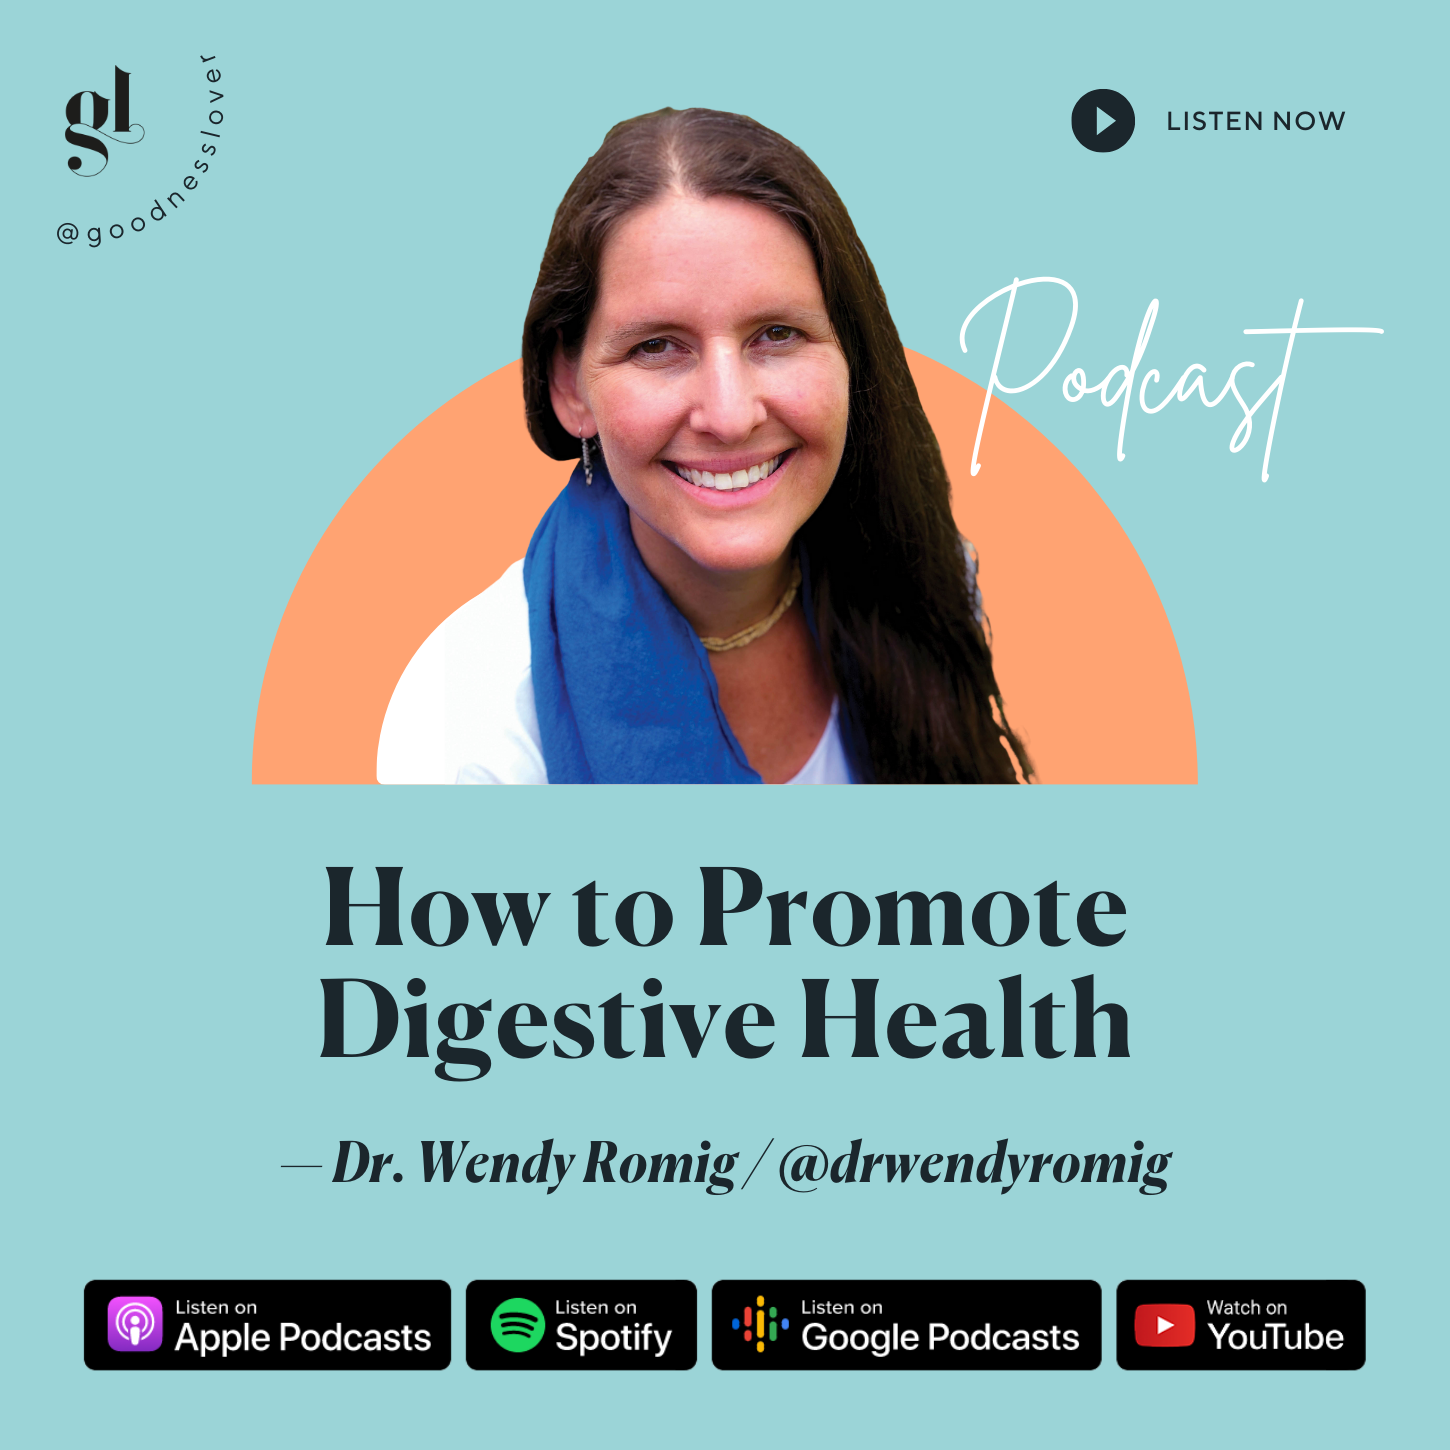 How to Promote Digestive Health | Dr. Wendy Romig